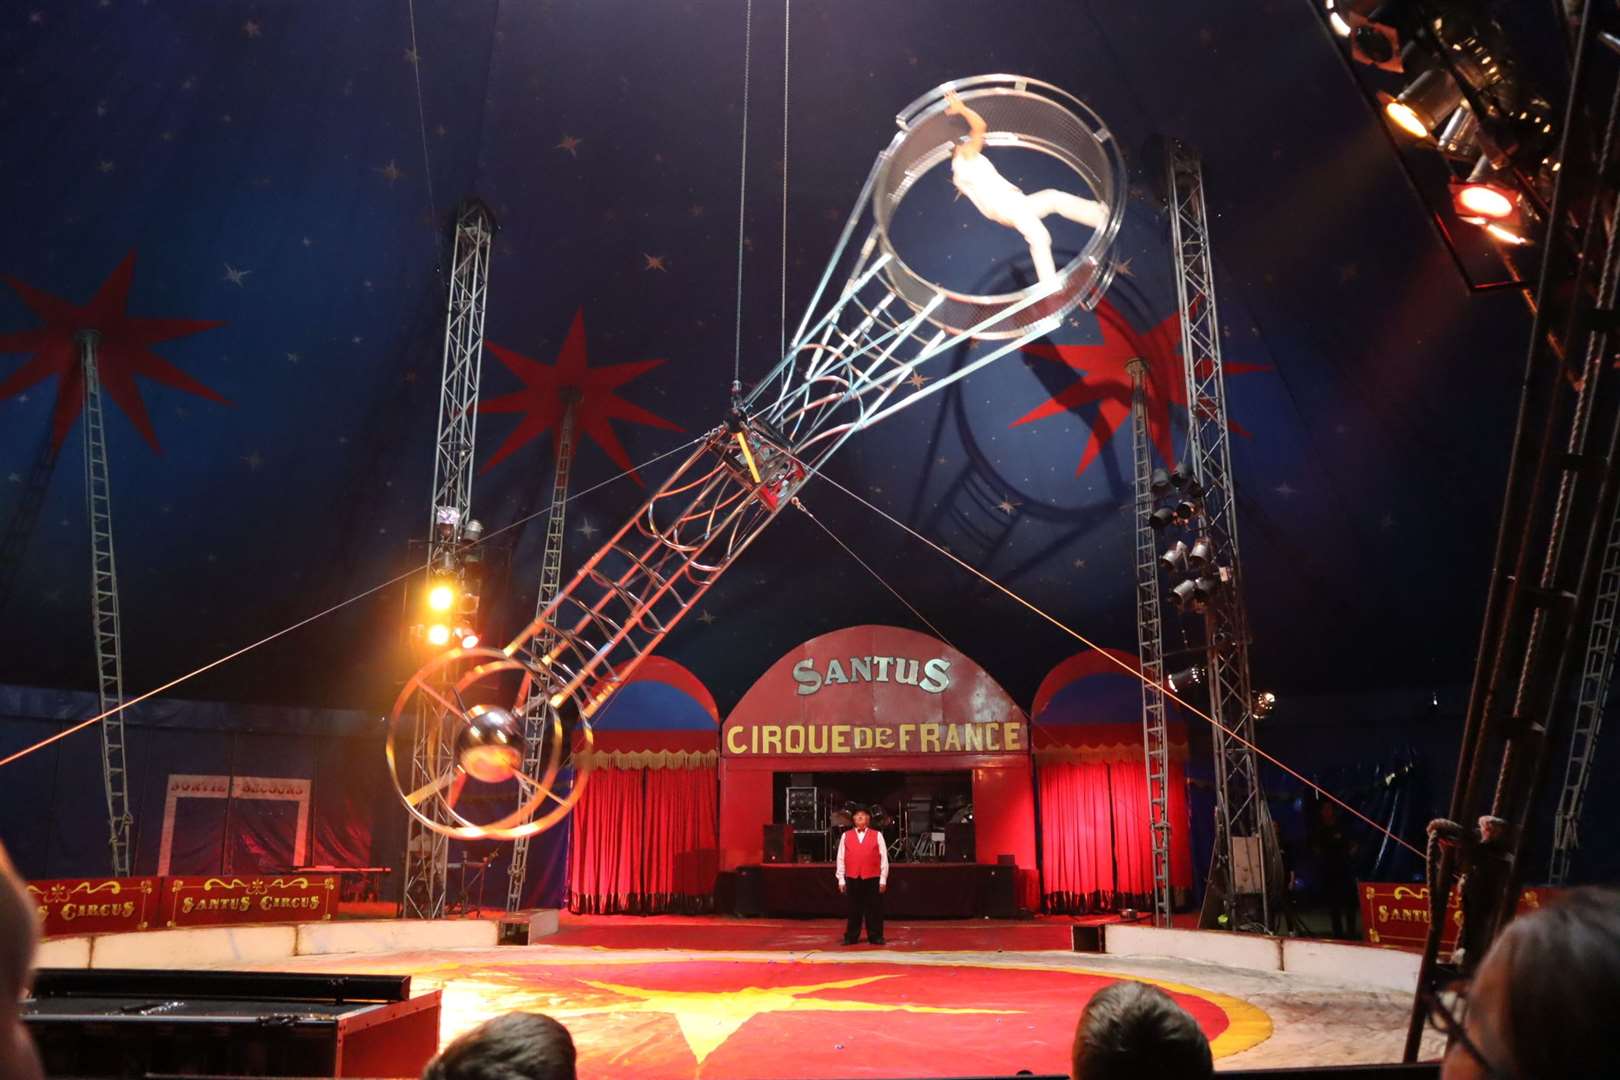 Daredevil Sergio Silva on the Wheel of Death at Santus Circus on the Isle of Sheppey. Picture: John Nurden